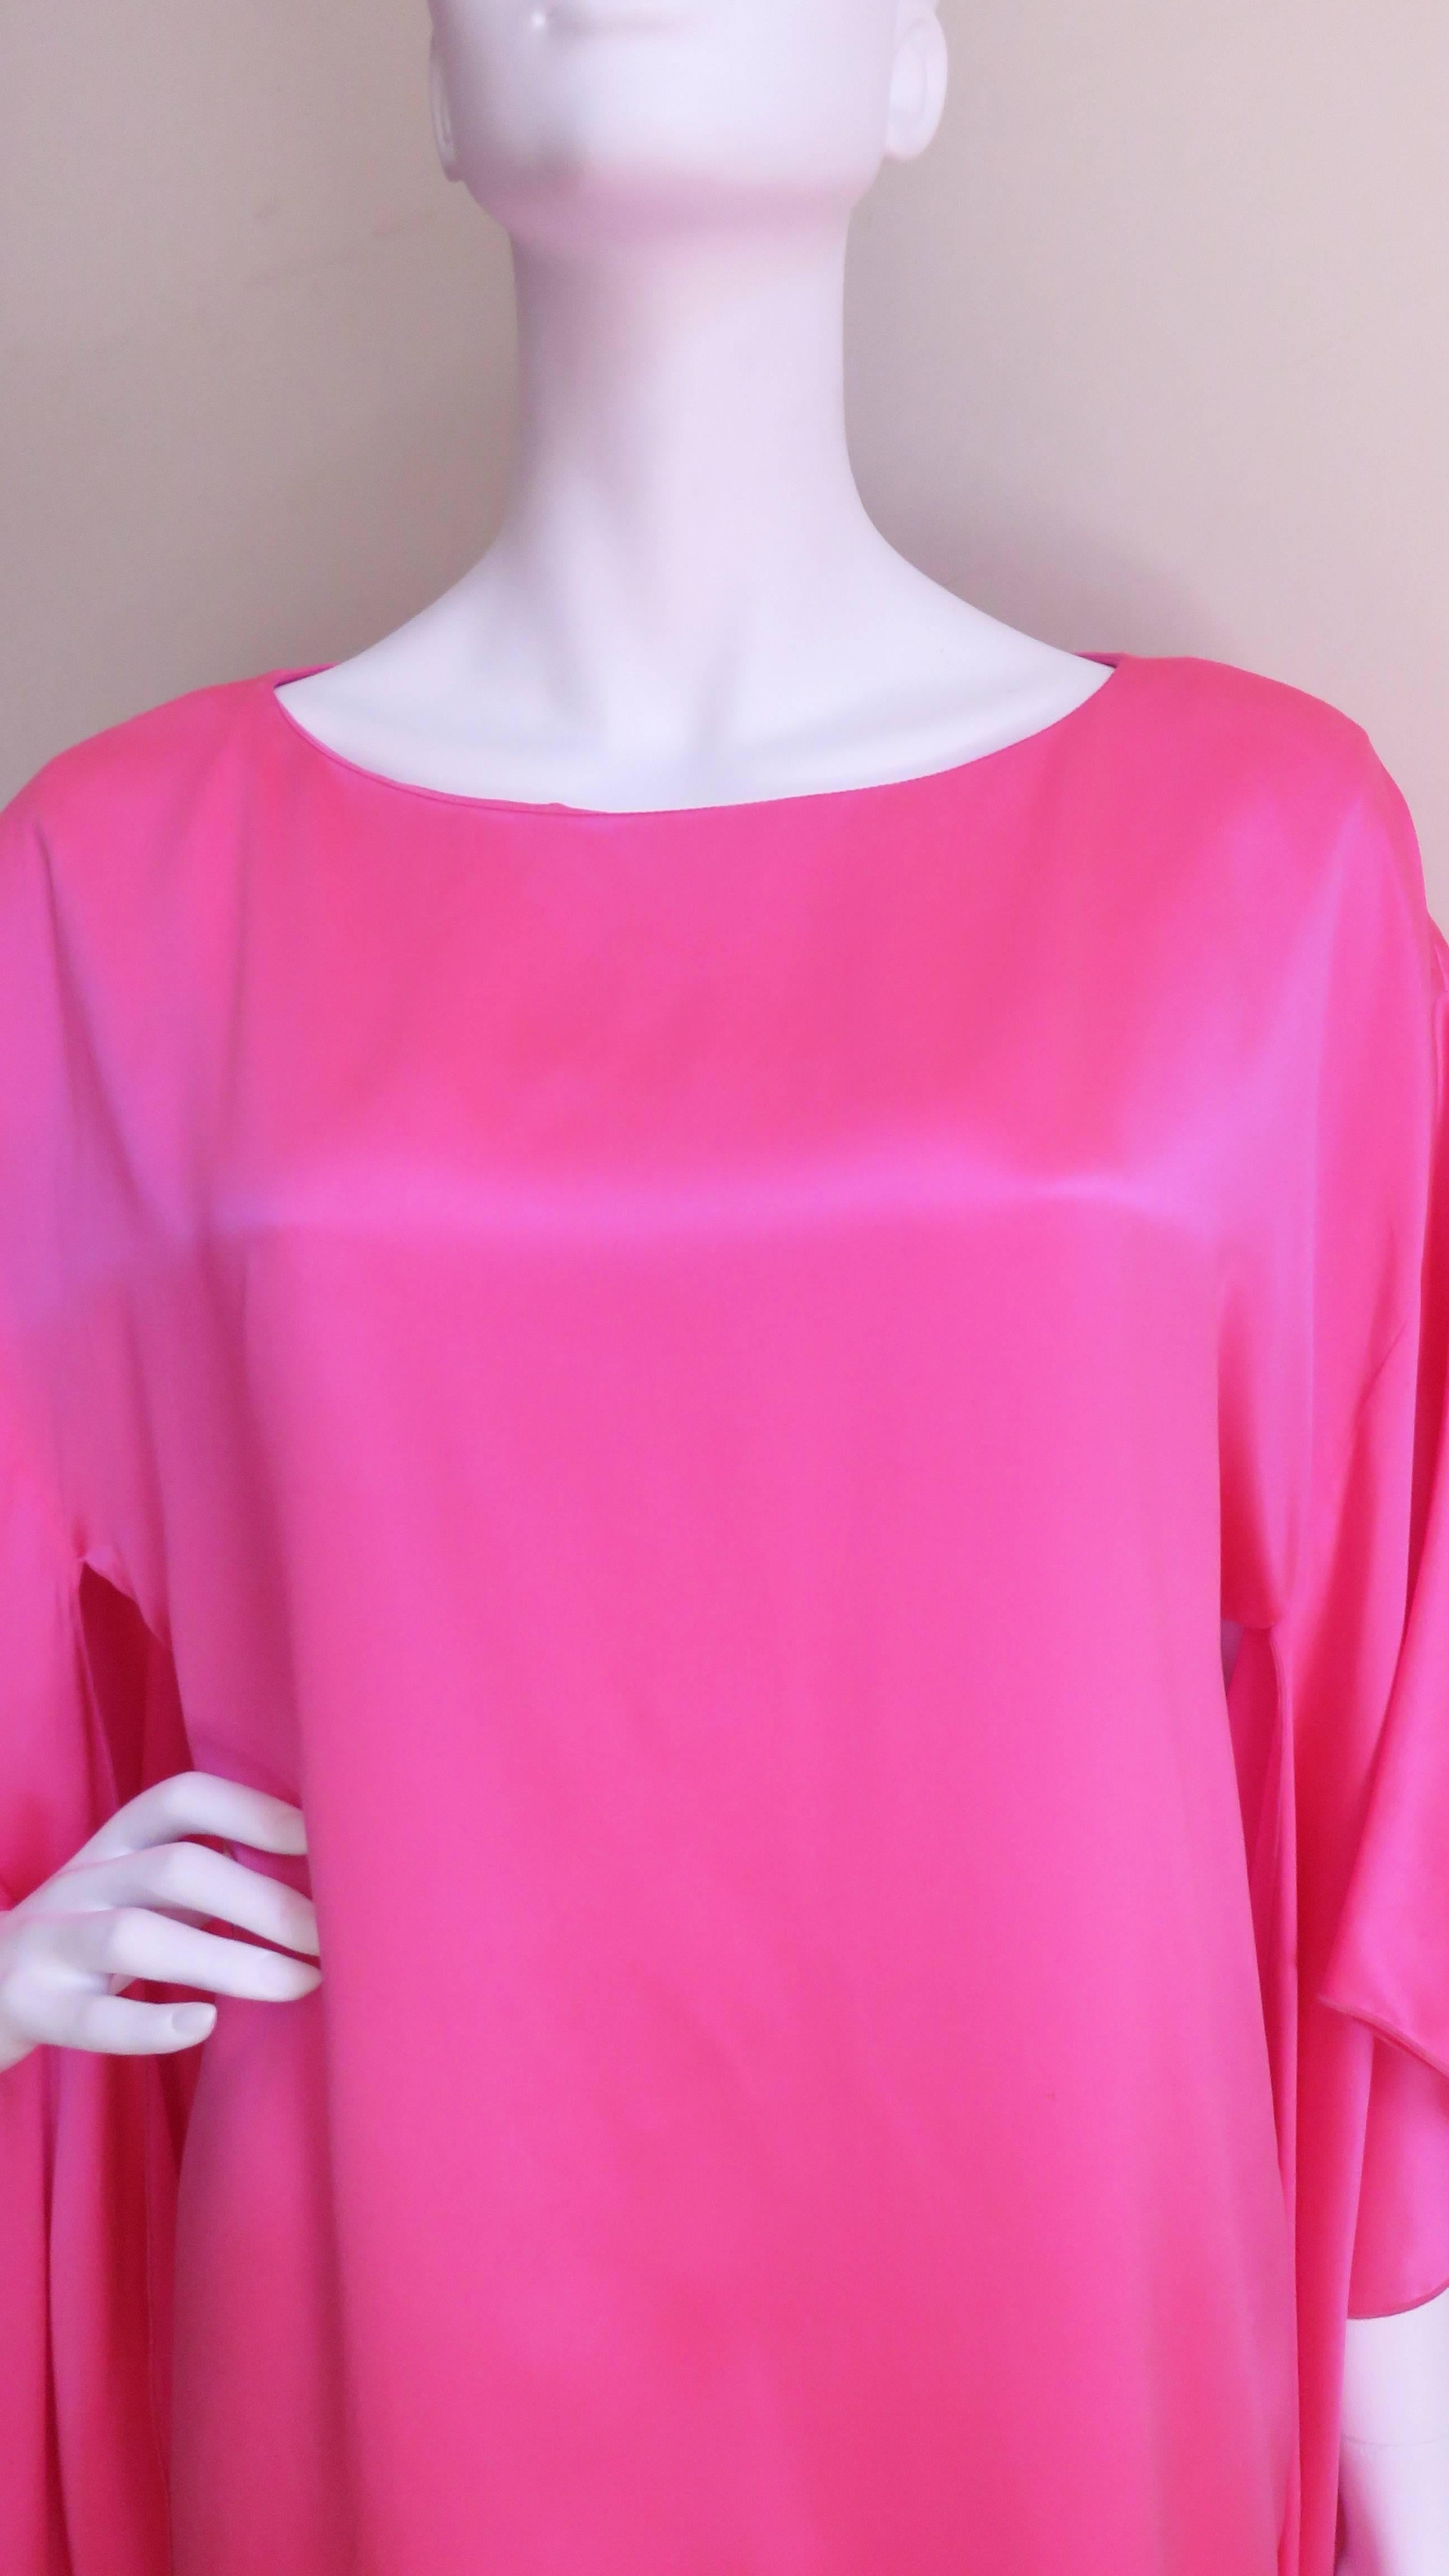 A beautiful vibrant pink silk mini dress from Holly Harp.  It has a crew neckline with a back keyhole and a self covered button above it.  The dress is cut straight from the shoulders with amazing angel wing sleeves draping the length of the dress.